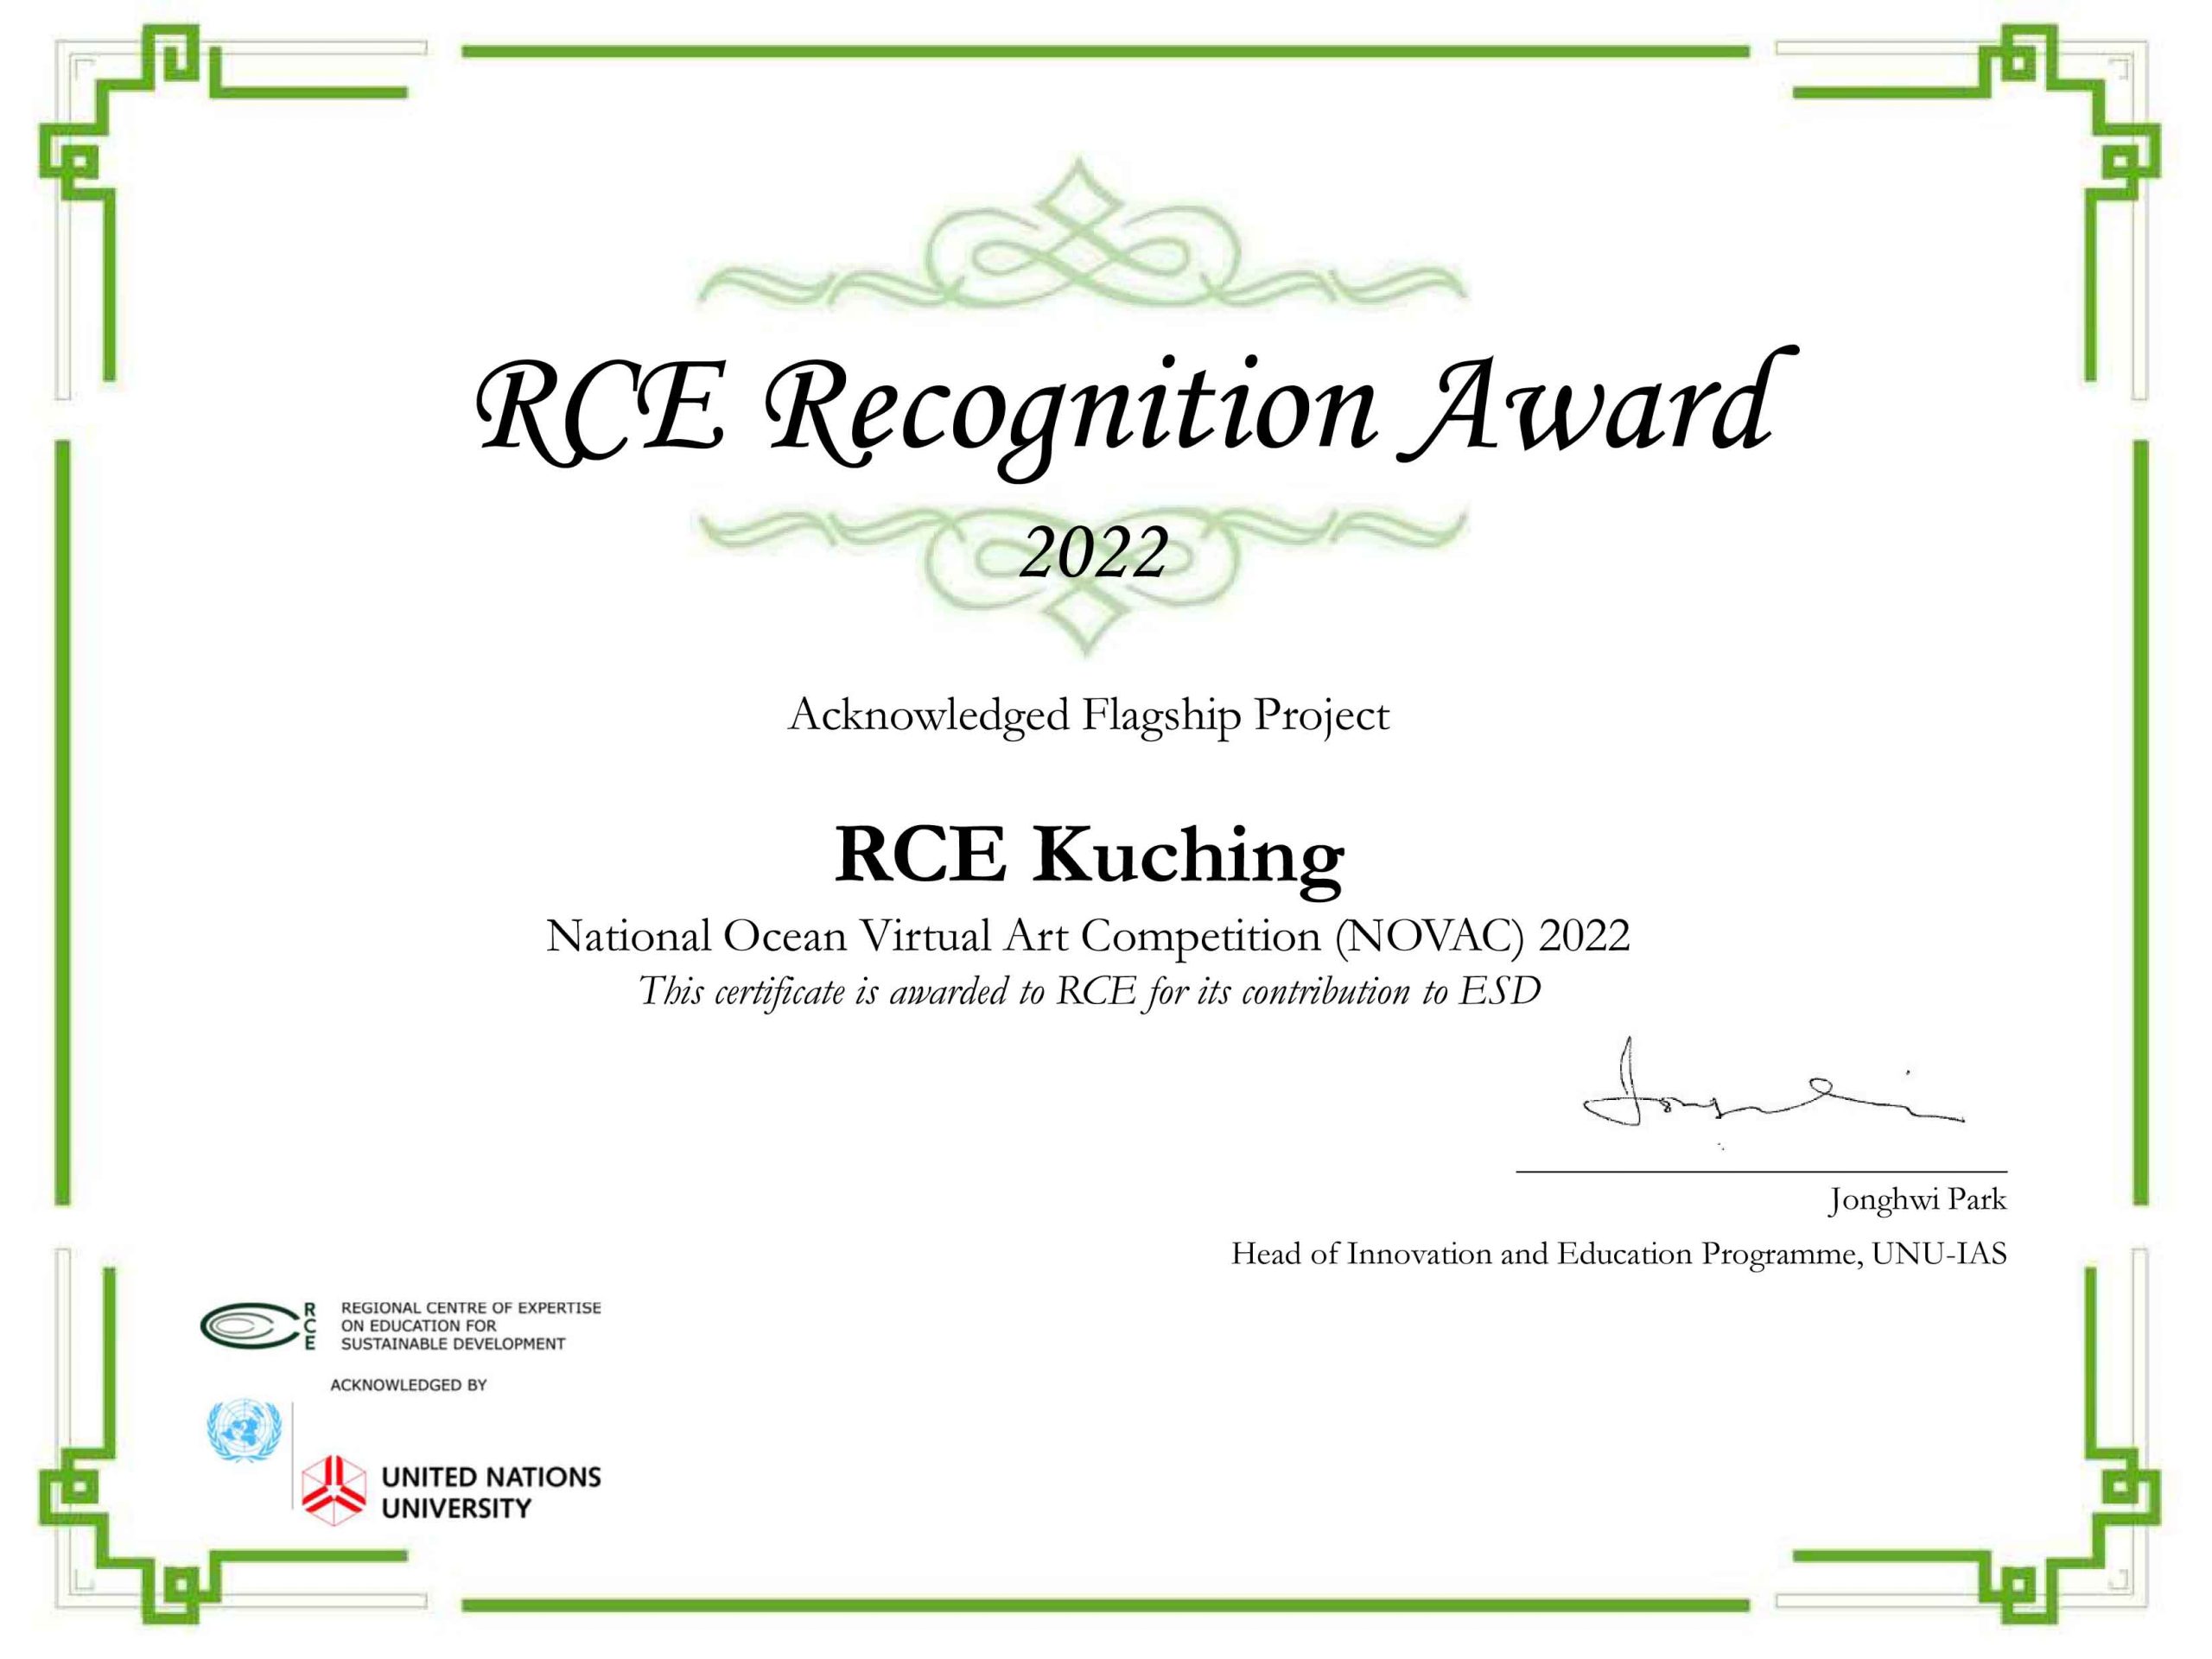 Microsoft PowerPoint - RCE Recognition Award Certificates_2022_A